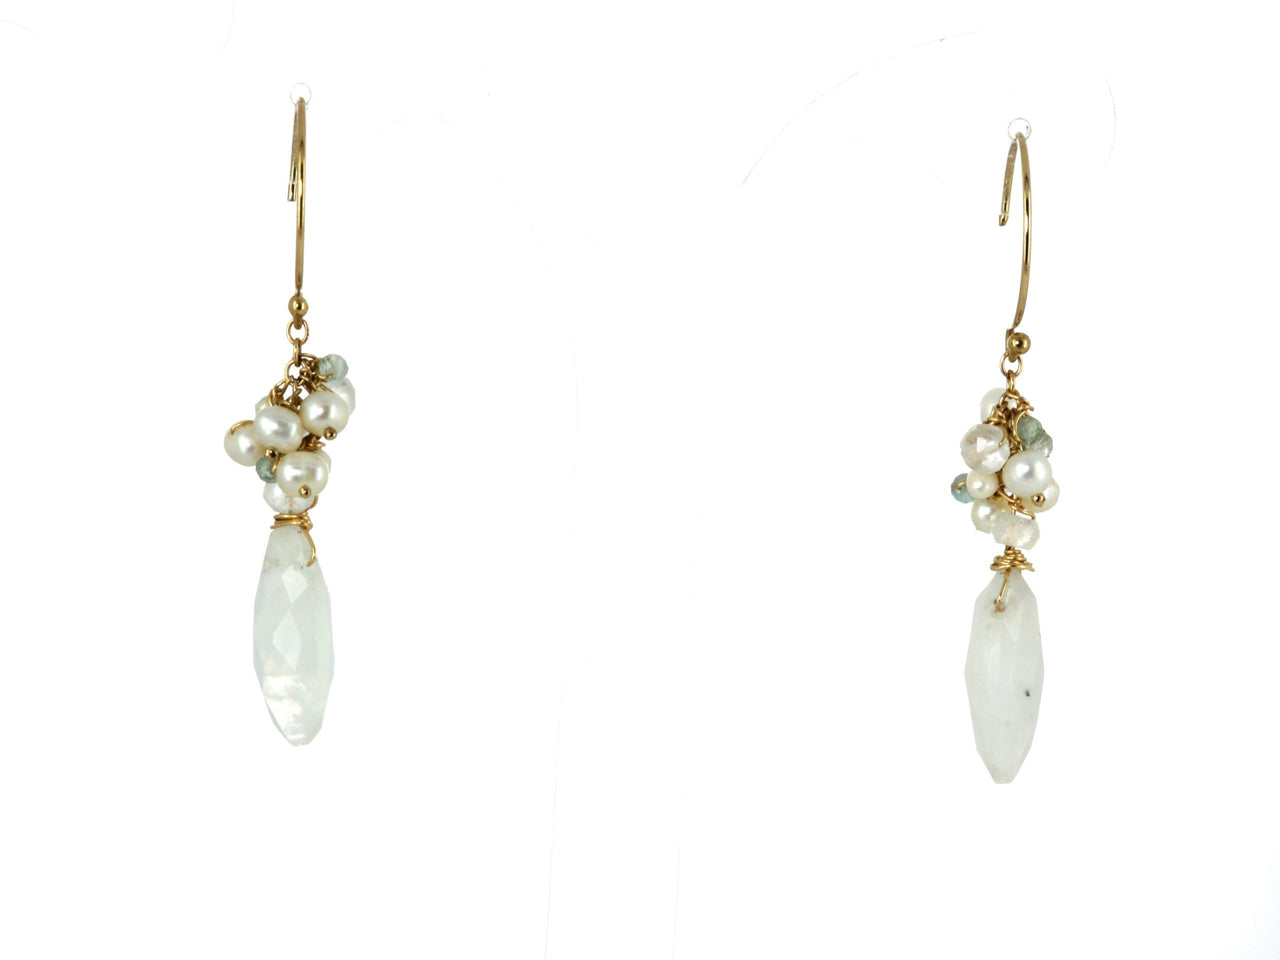 Rainbow Moonstone And Gold Earrings